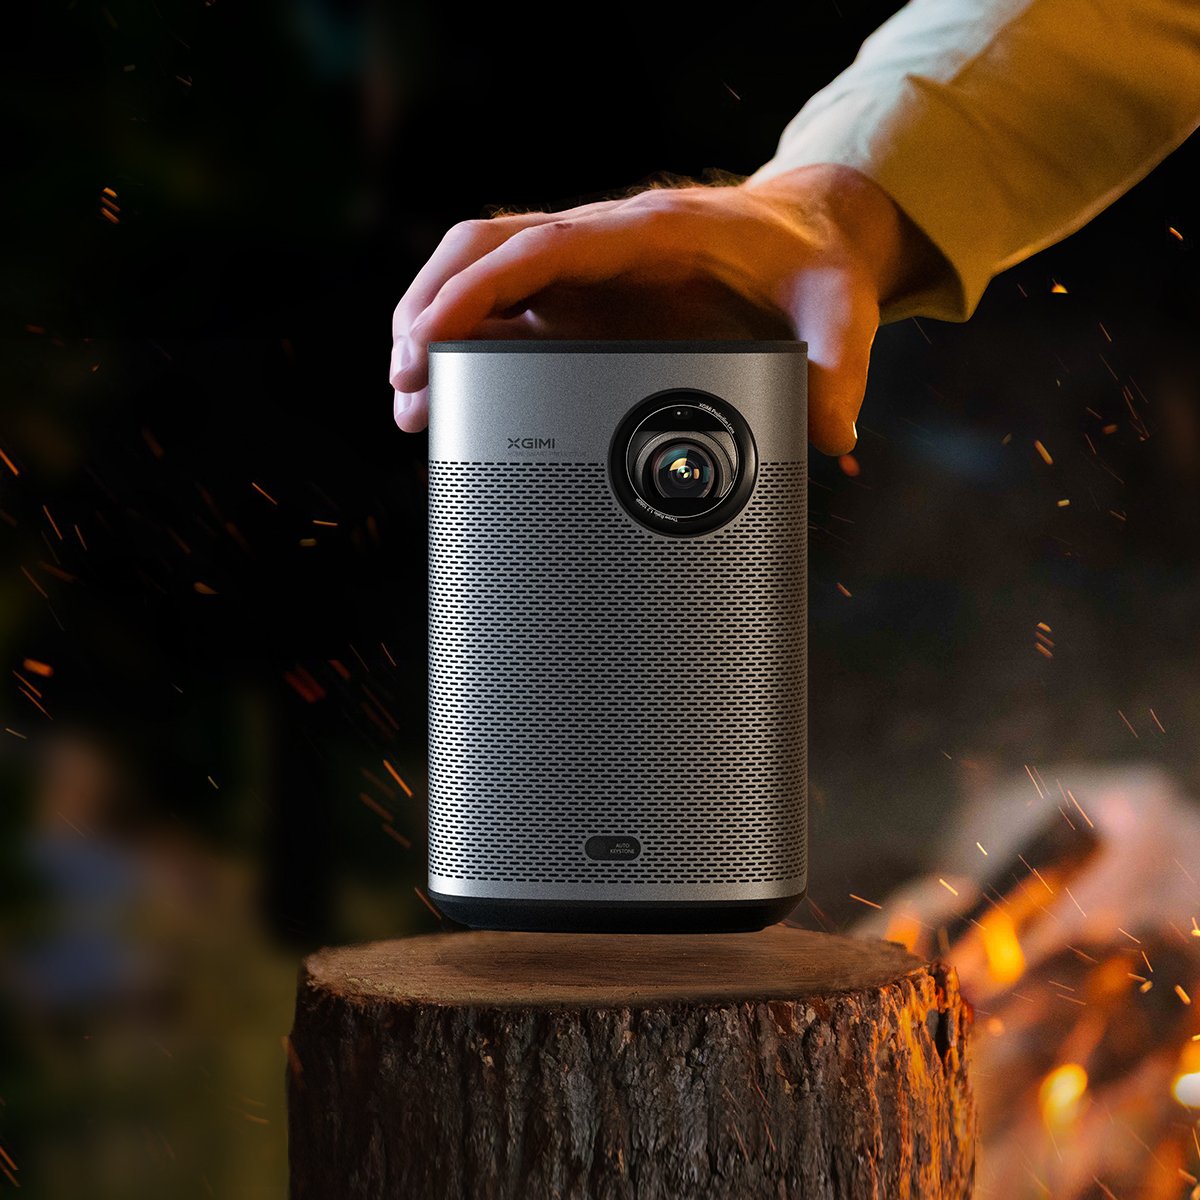 XGIMI Halo+ | Full HD, 900 ANSI Lumen Portable Projector - Storming Gravity